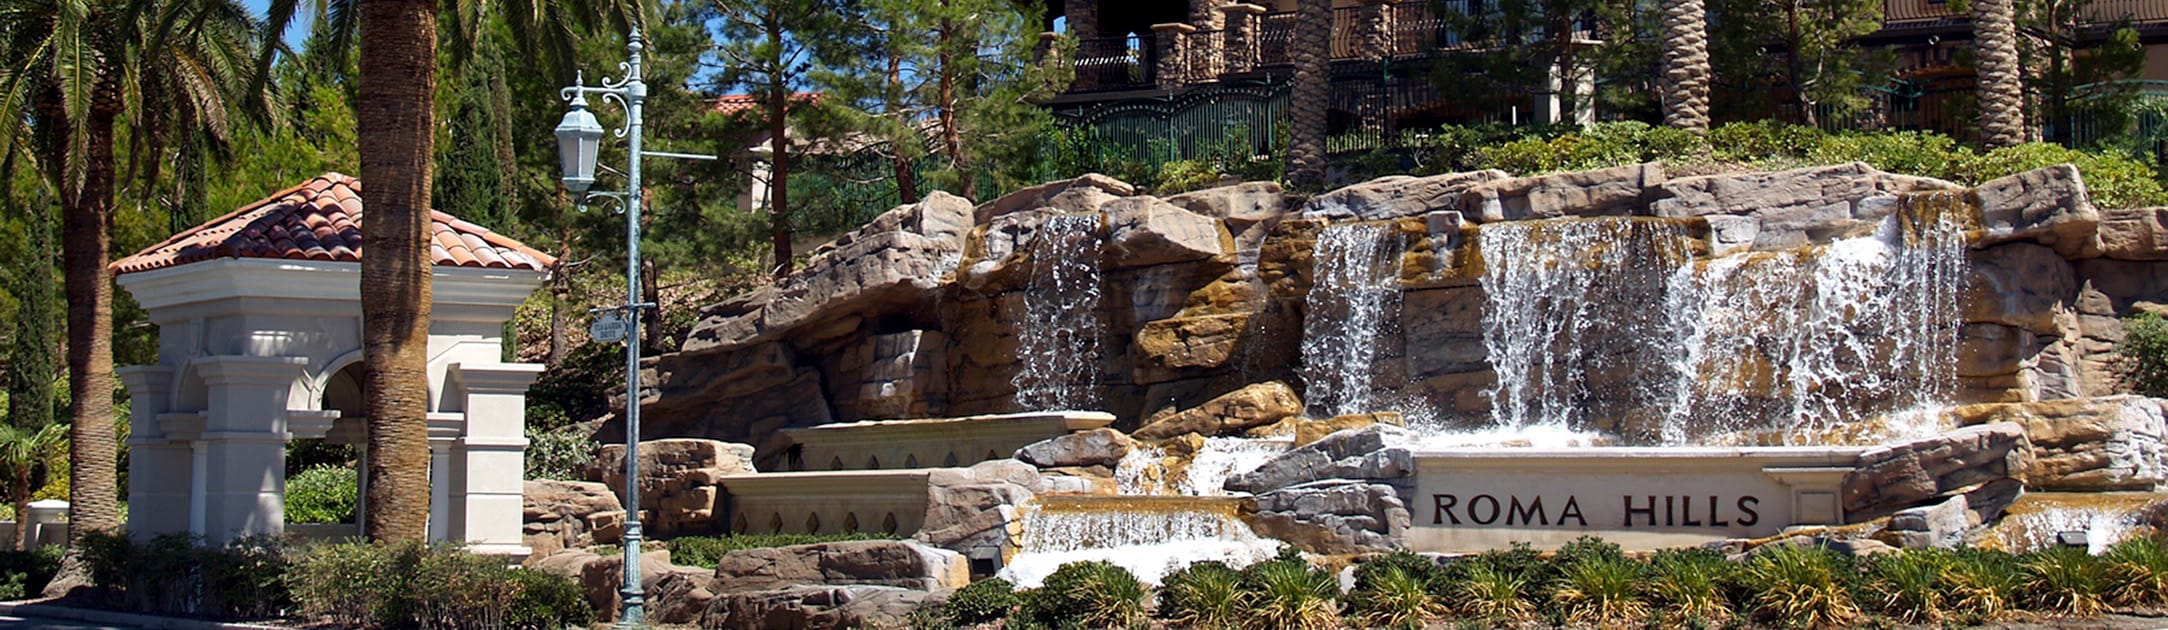 Rocks and waterfalls with a sign that says Roma Hills and gate entrance building to the left of it.